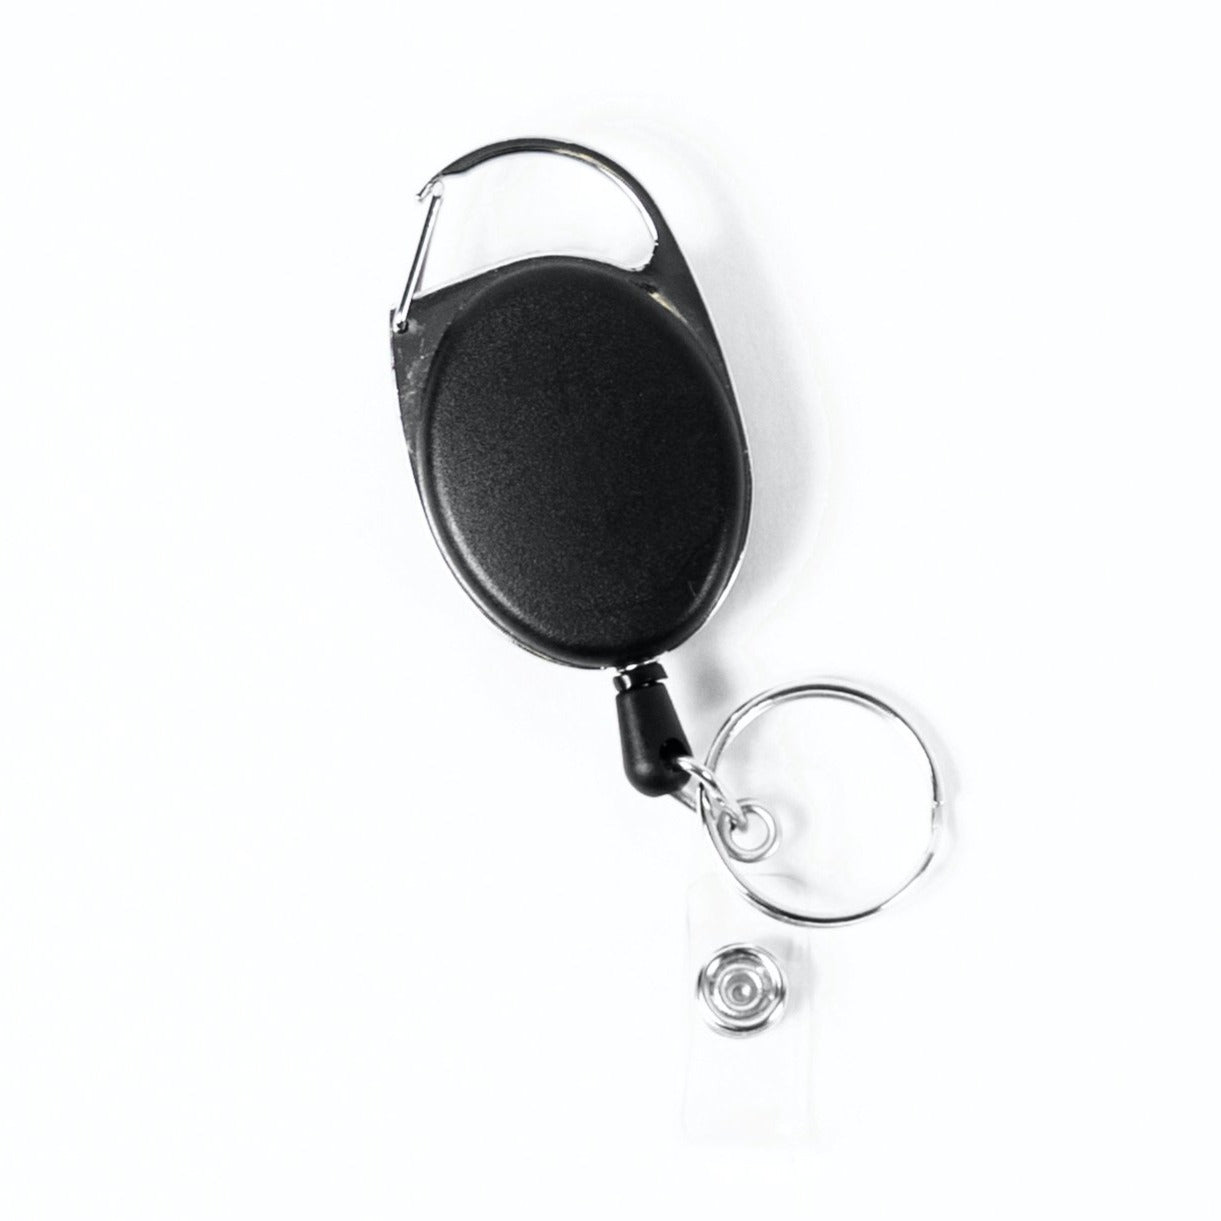 Retractable Key Ring Carabineer with Belt Clip